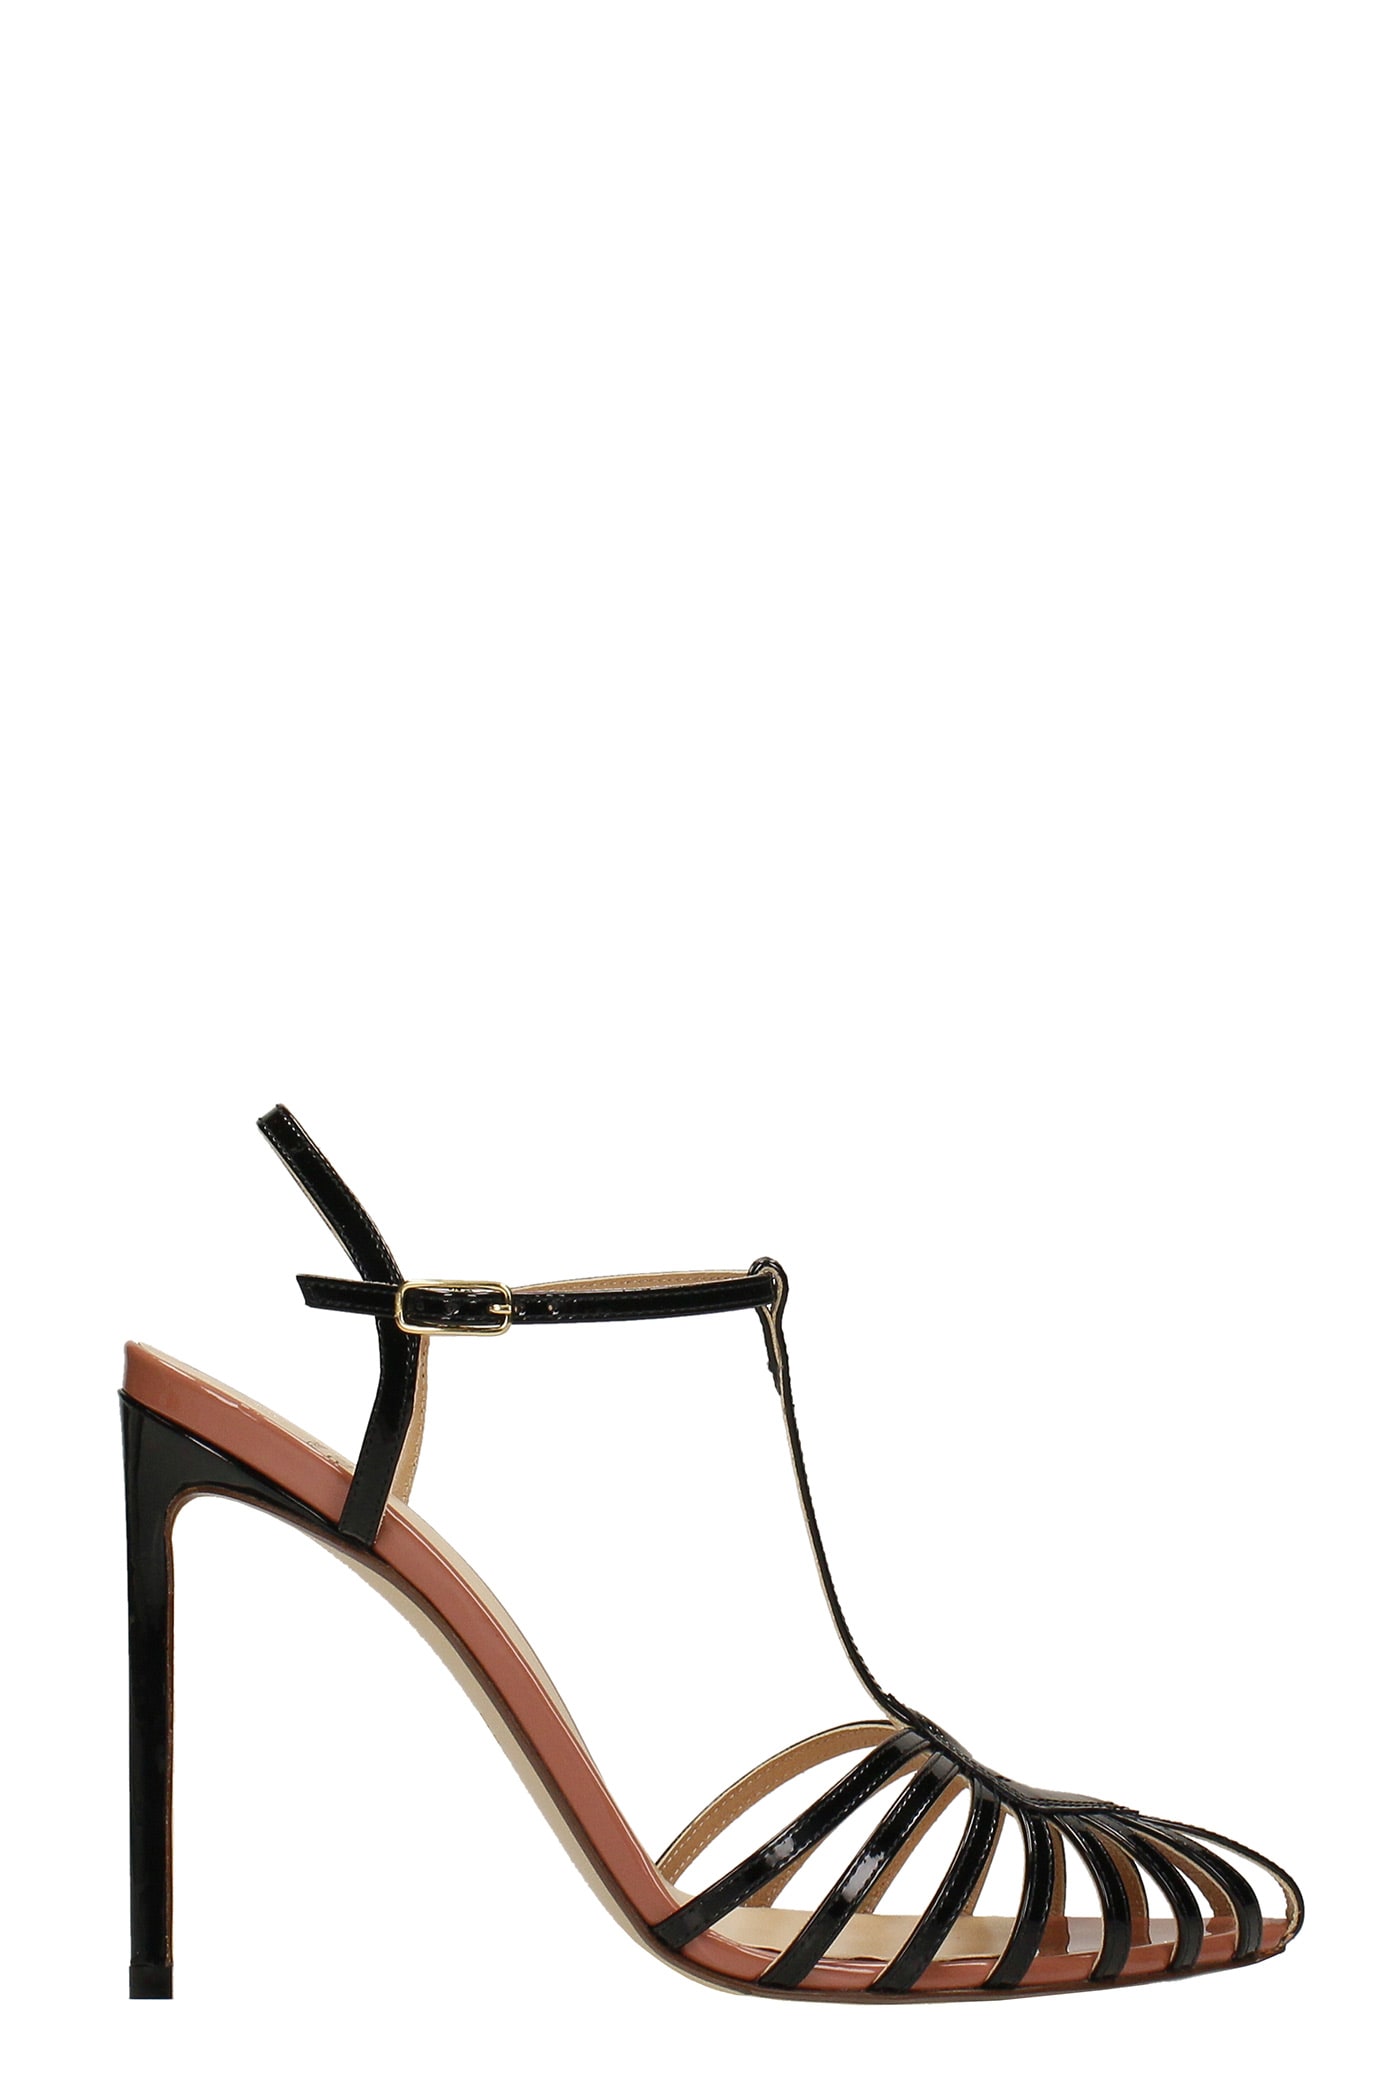 Francesco Russo Sandals In Black Patent Leather